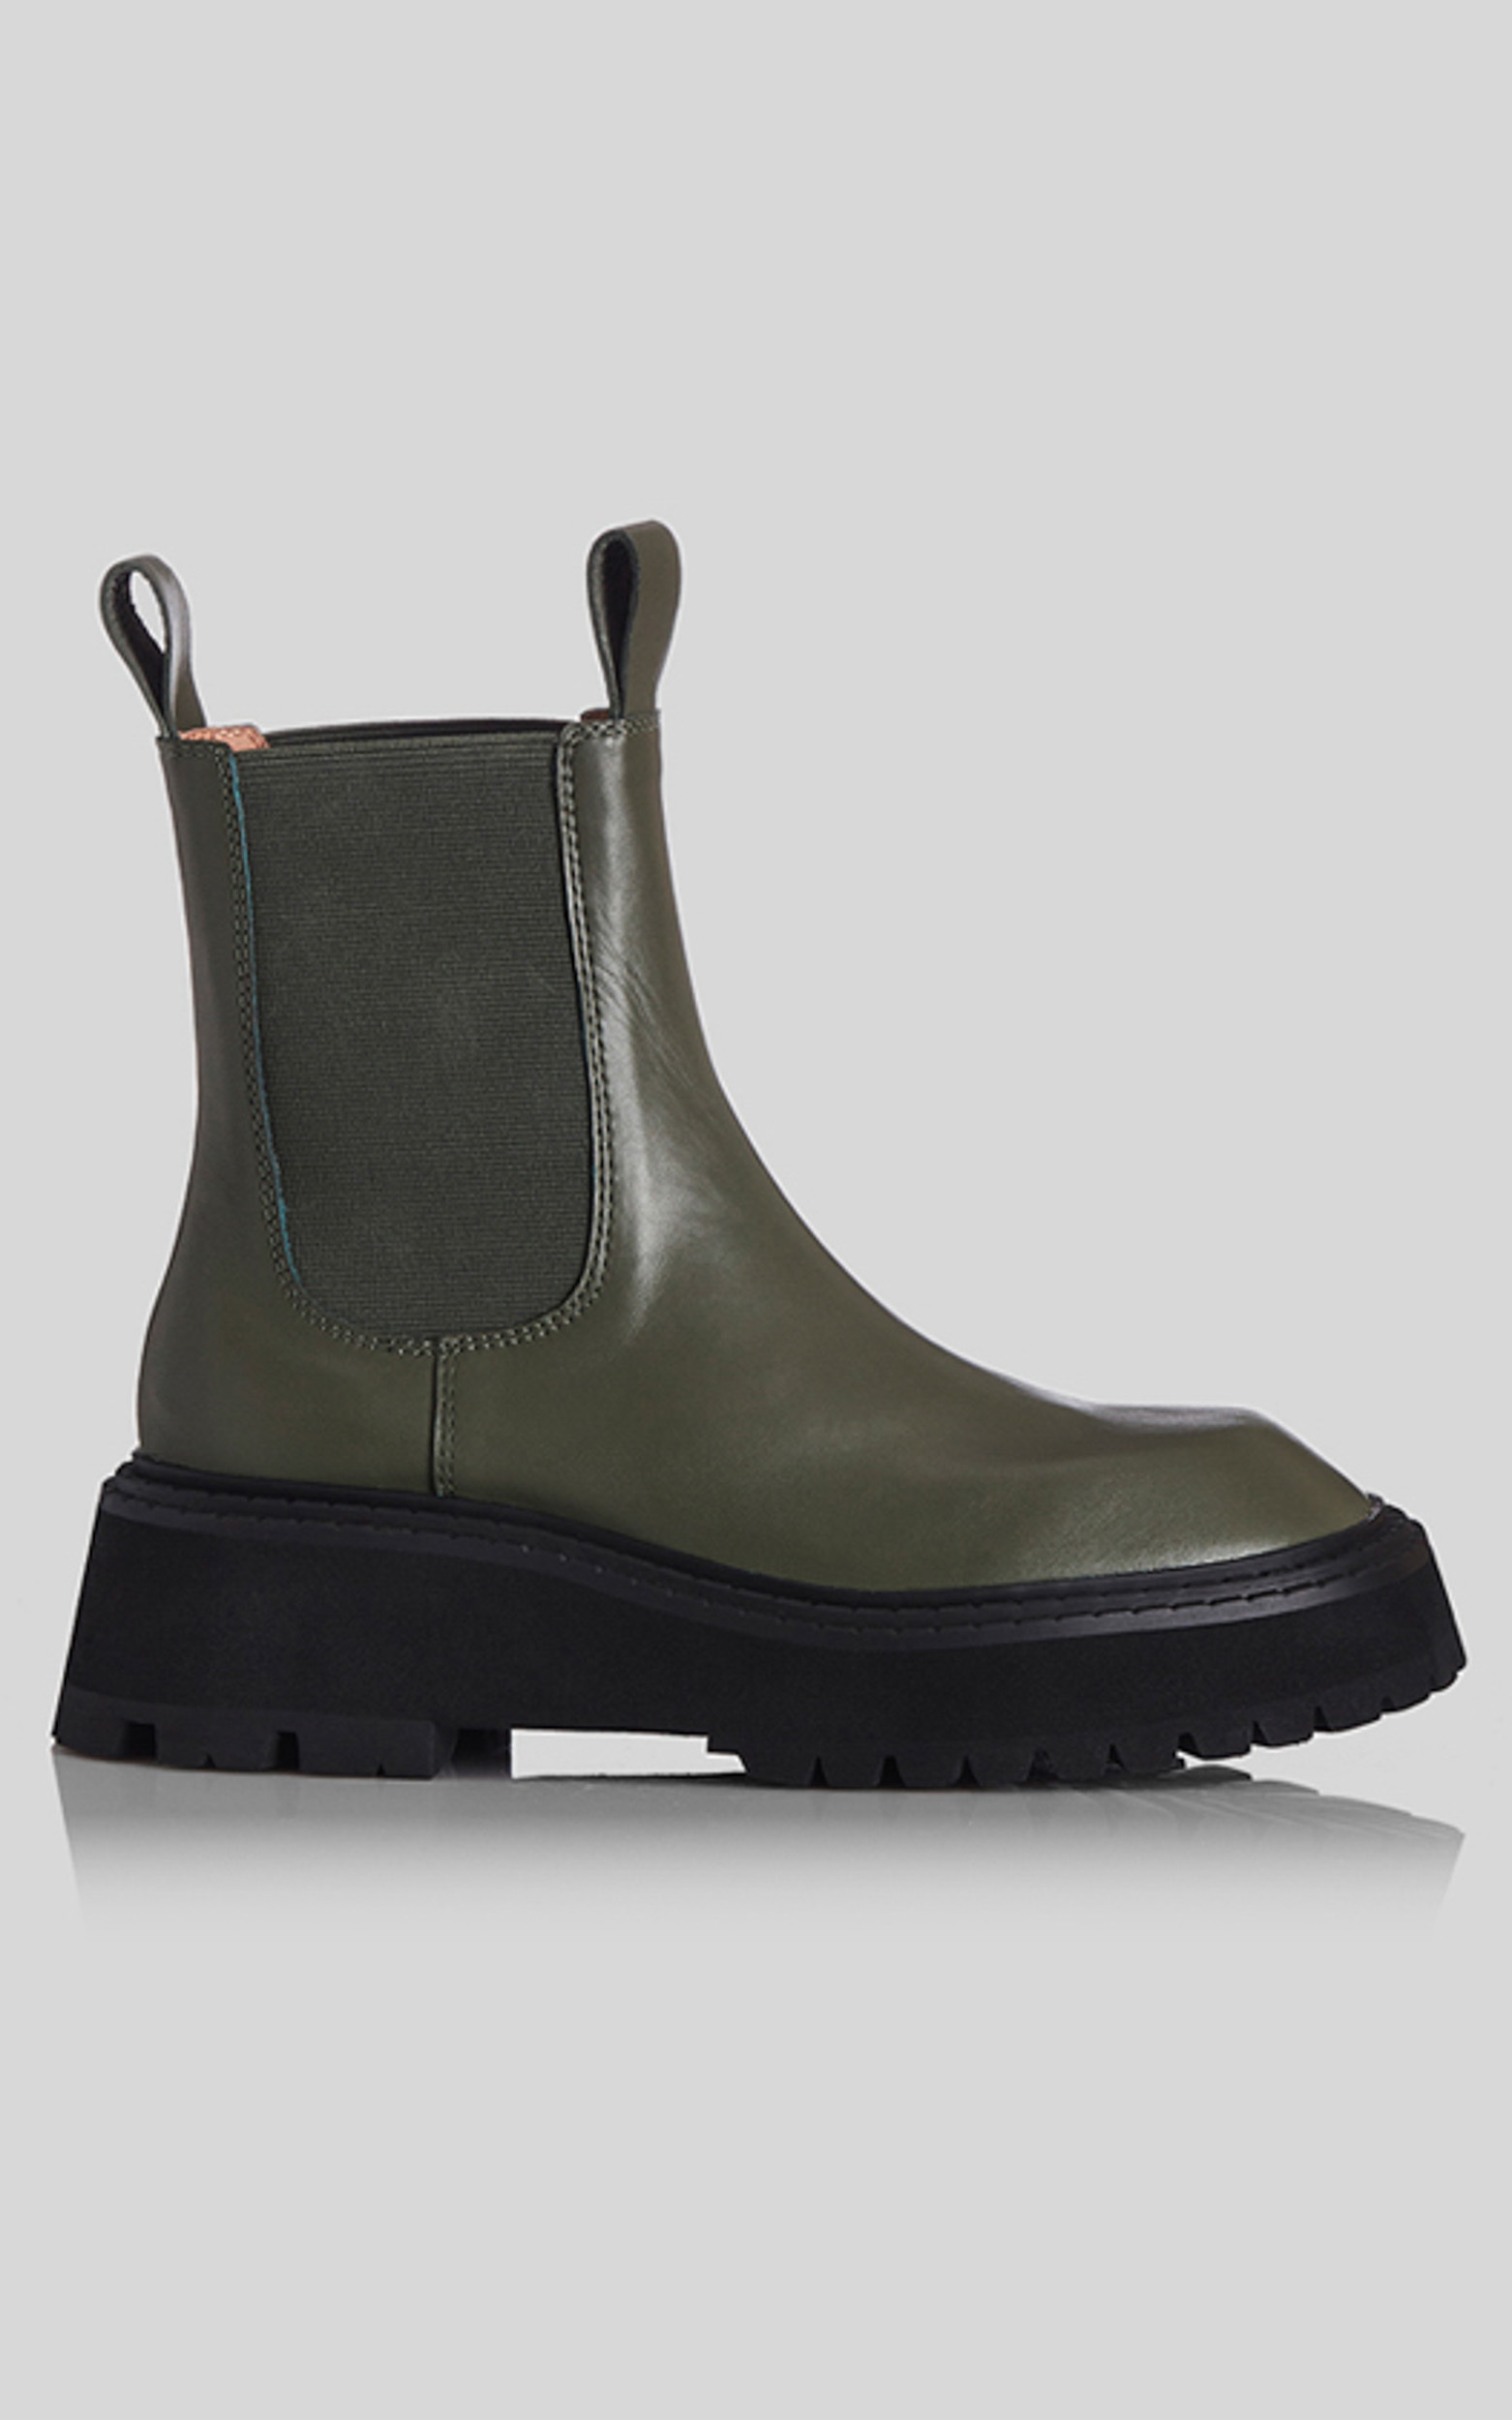 Alias Mae - Tess Boots in Olive Leather - 10, GRN1, hi-res image number null